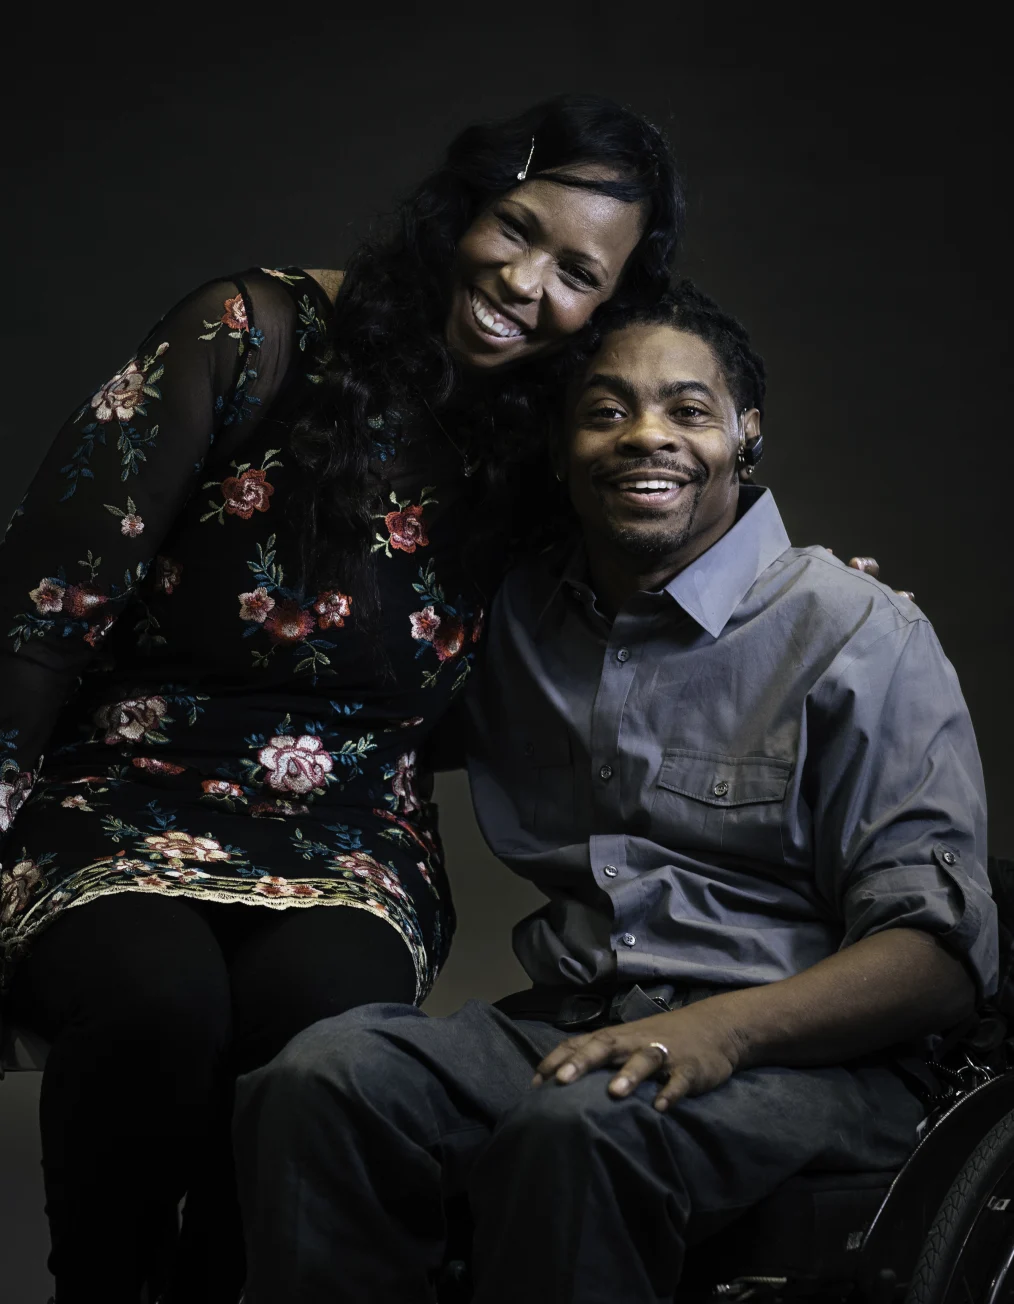 This picture shows a man and a woman with deep skin tones smiling toward the camera. The man
is sitting in a wheelchair with an earpiece attached to his ear while the woman leans in and hugs him.